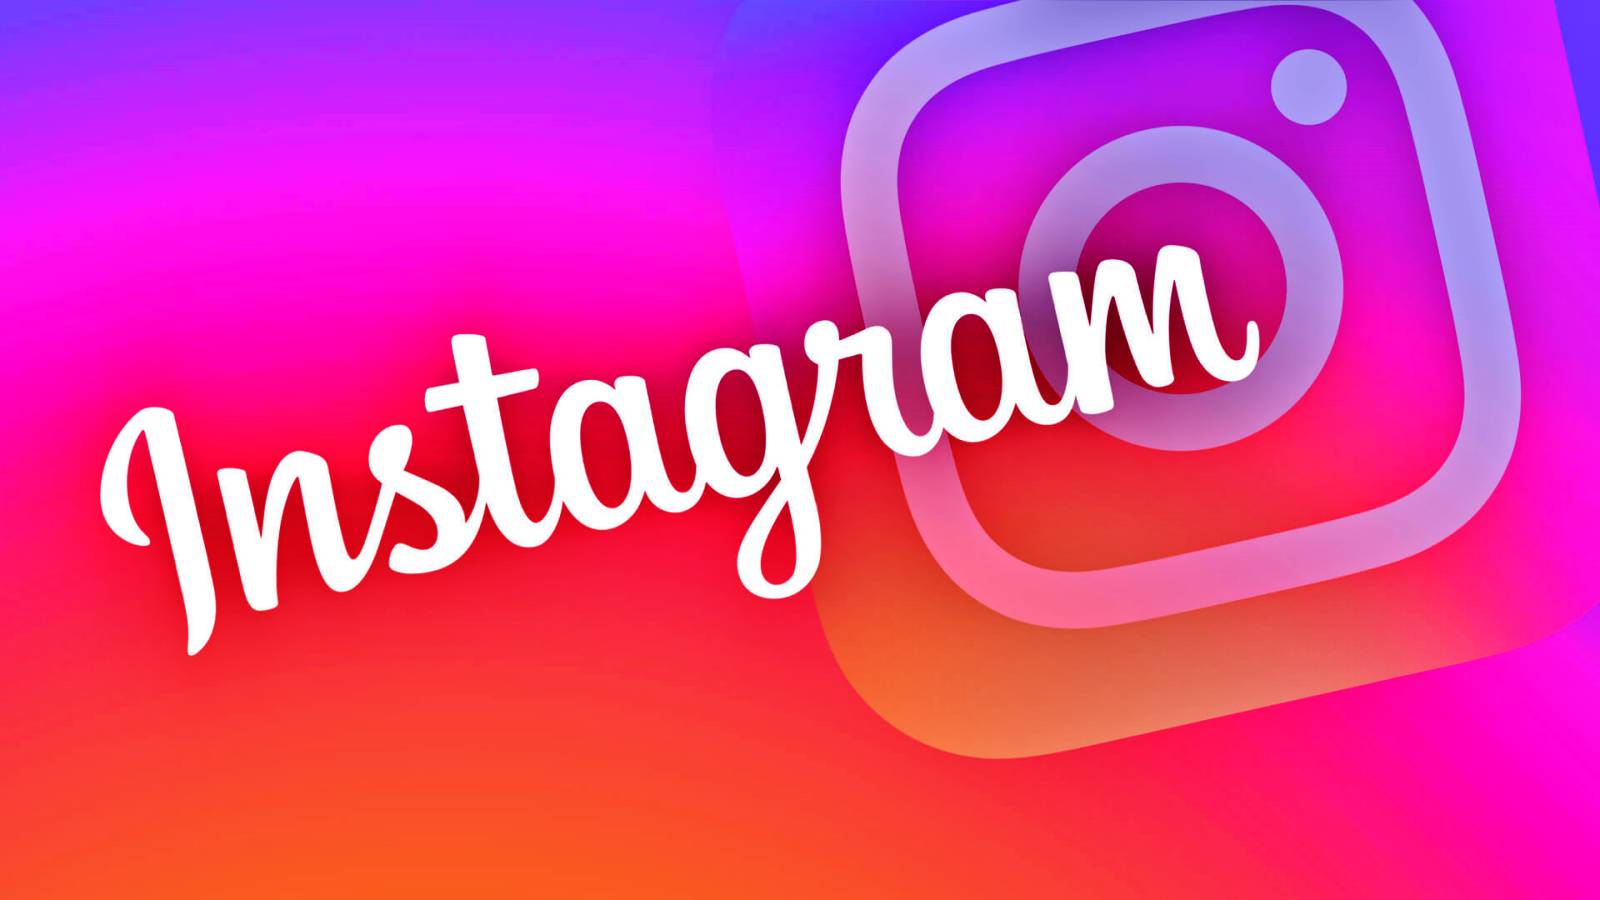 Instagram Update brings News for Phones, what Changes are Offered